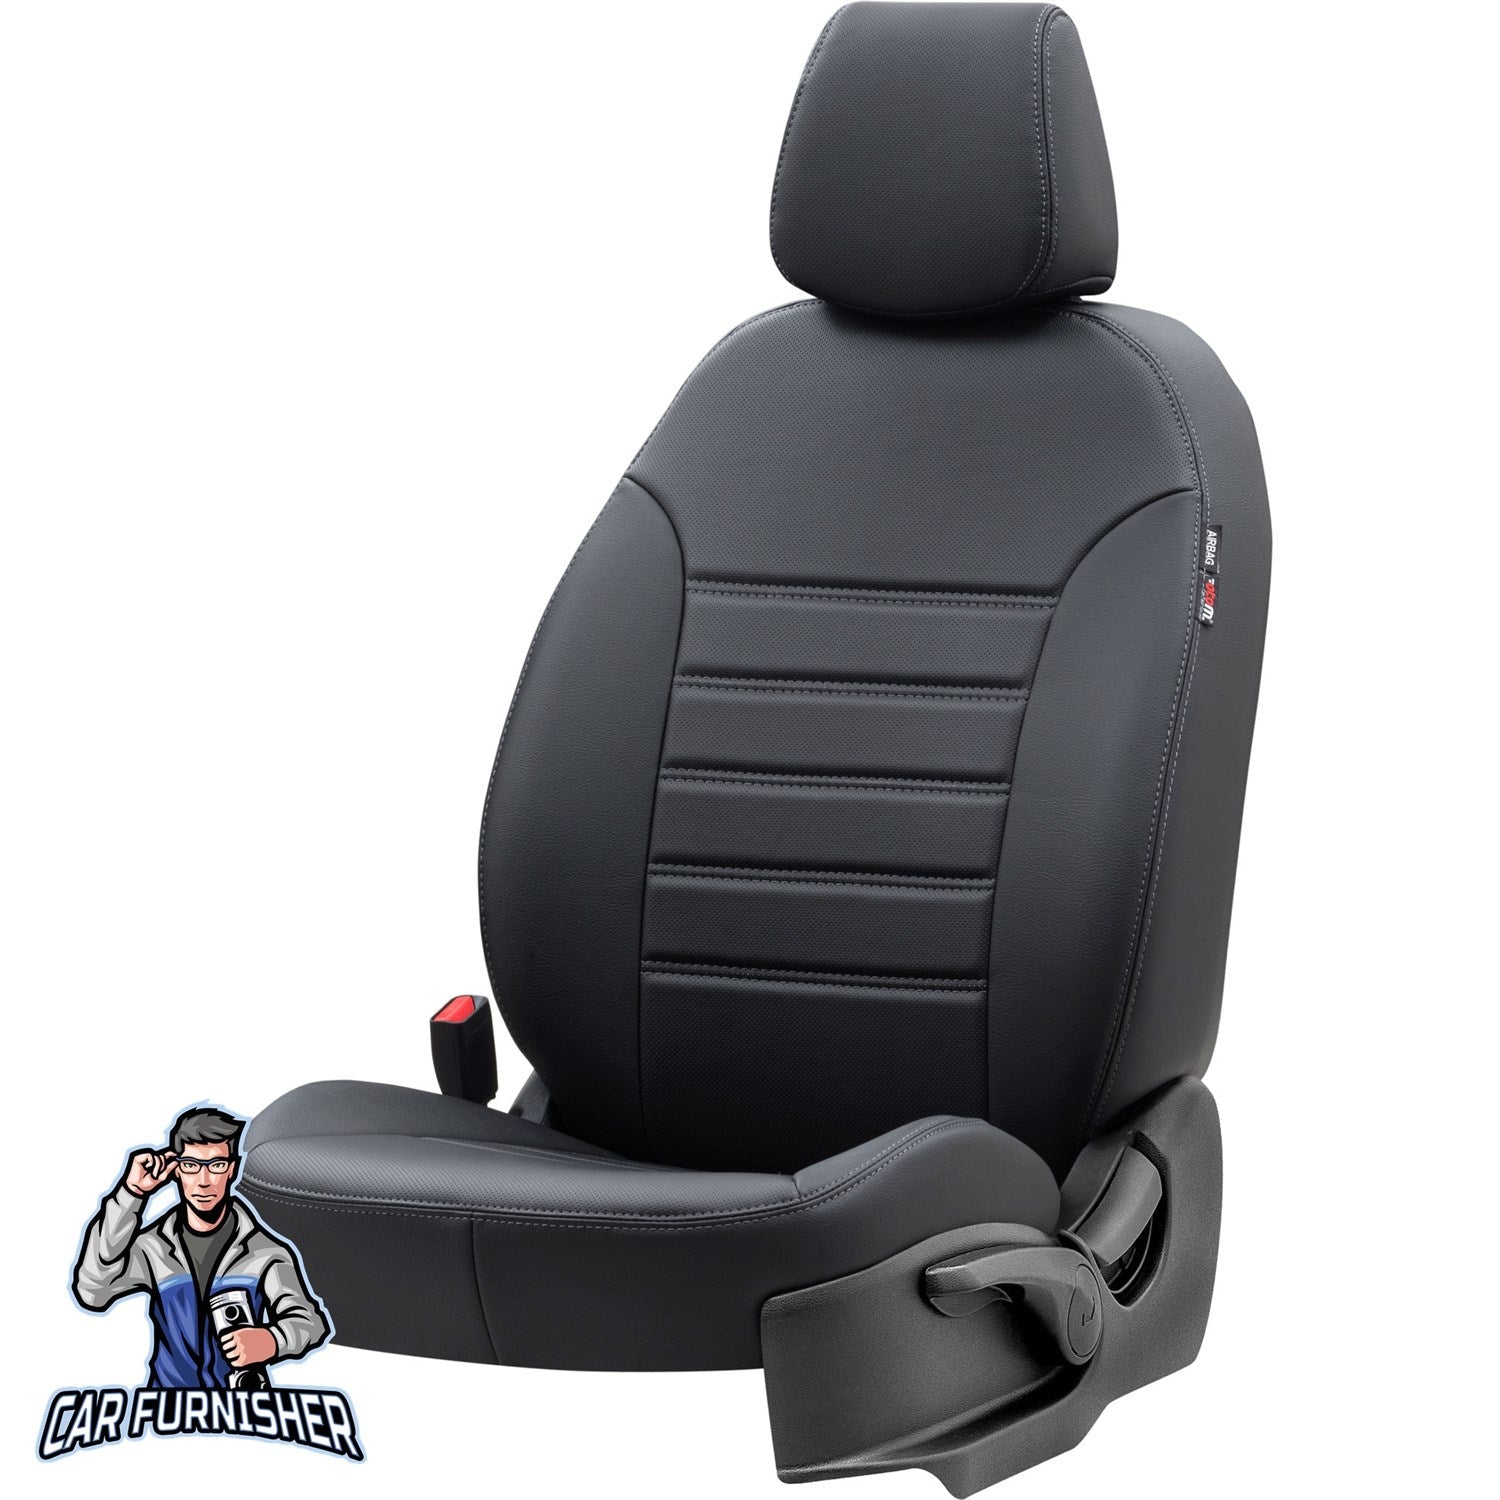 Isuzu D-Max Seat Covers Istanbul Leather Design Black Leather